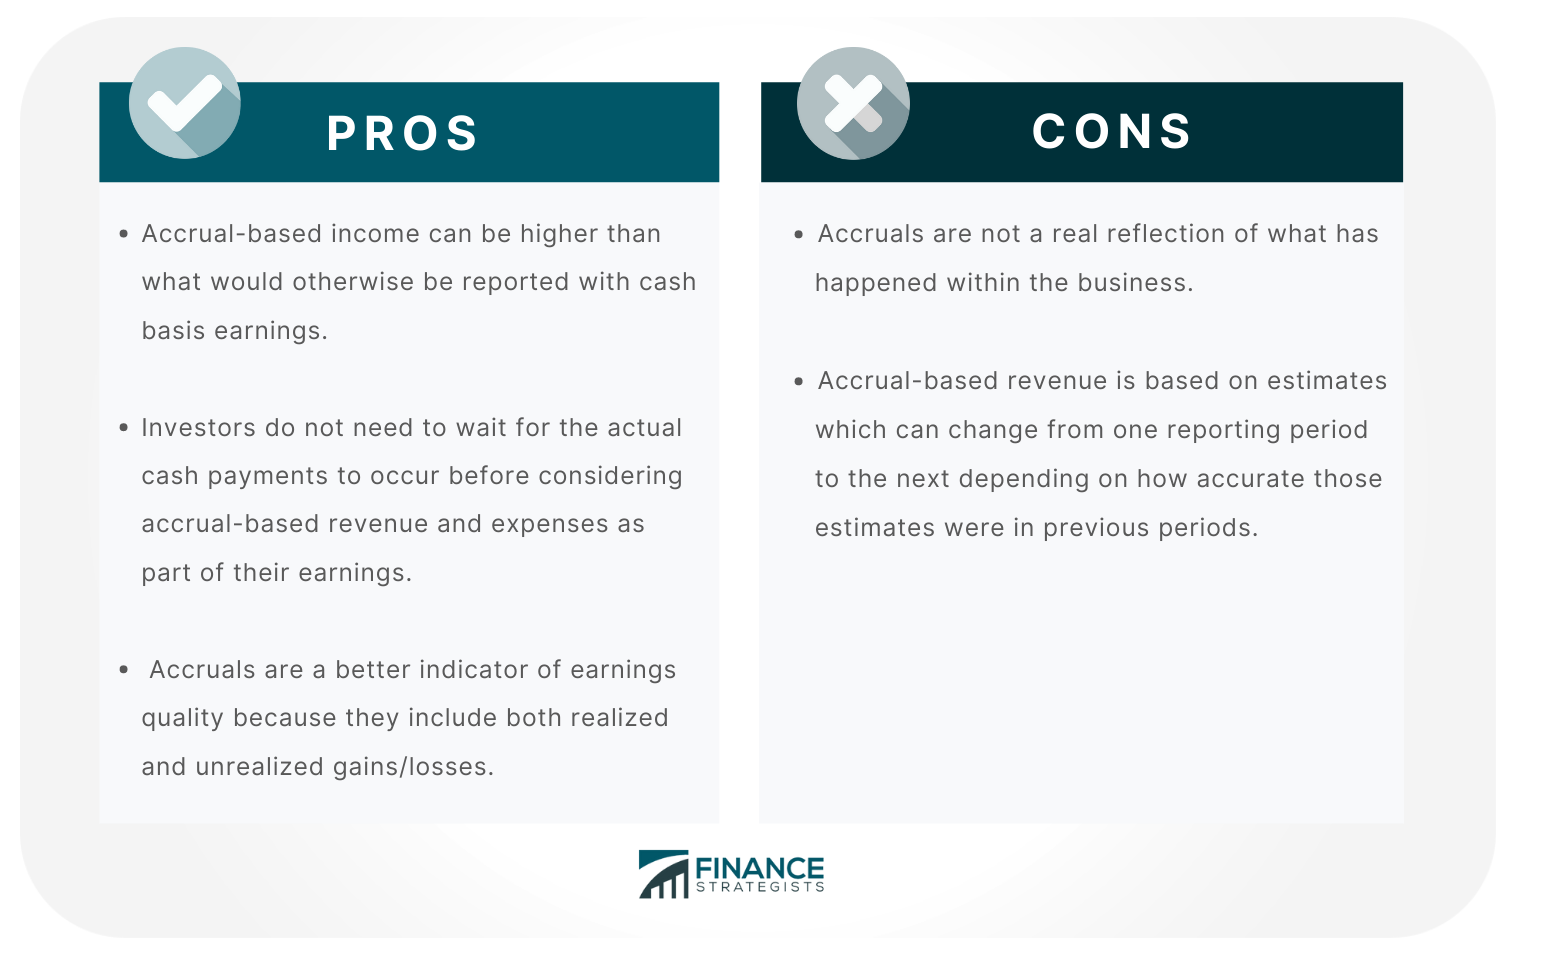 Pros & Cons of Accruals